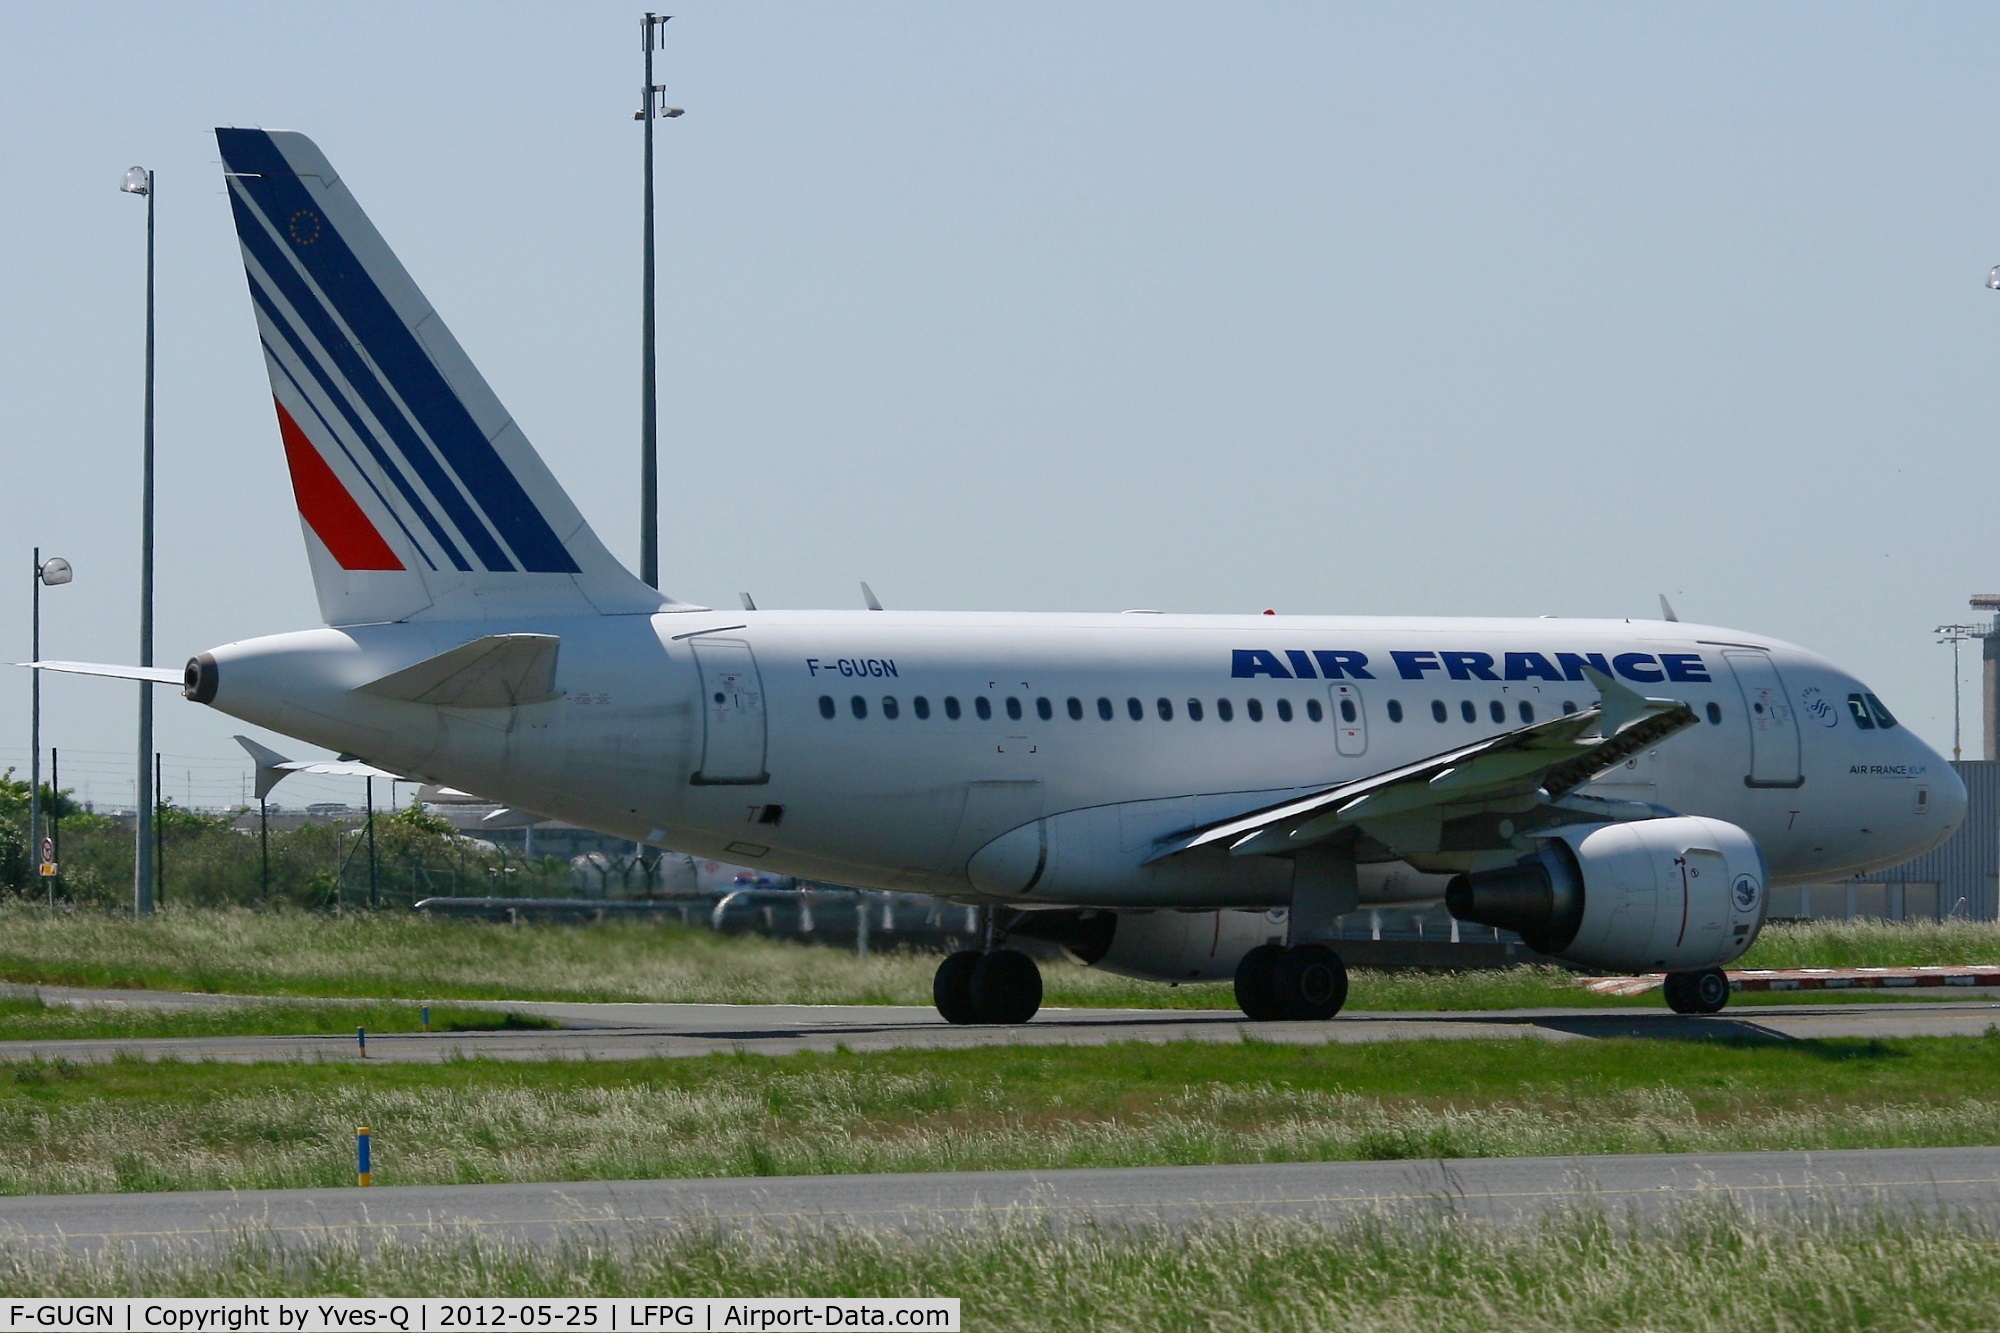 F-GUGN, 2006 Airbus A318-111 C/N 2918, Airbus A318-111, Taxiing before take off, Roissy Charles De Gaulle Airport (LFPG-CDG)